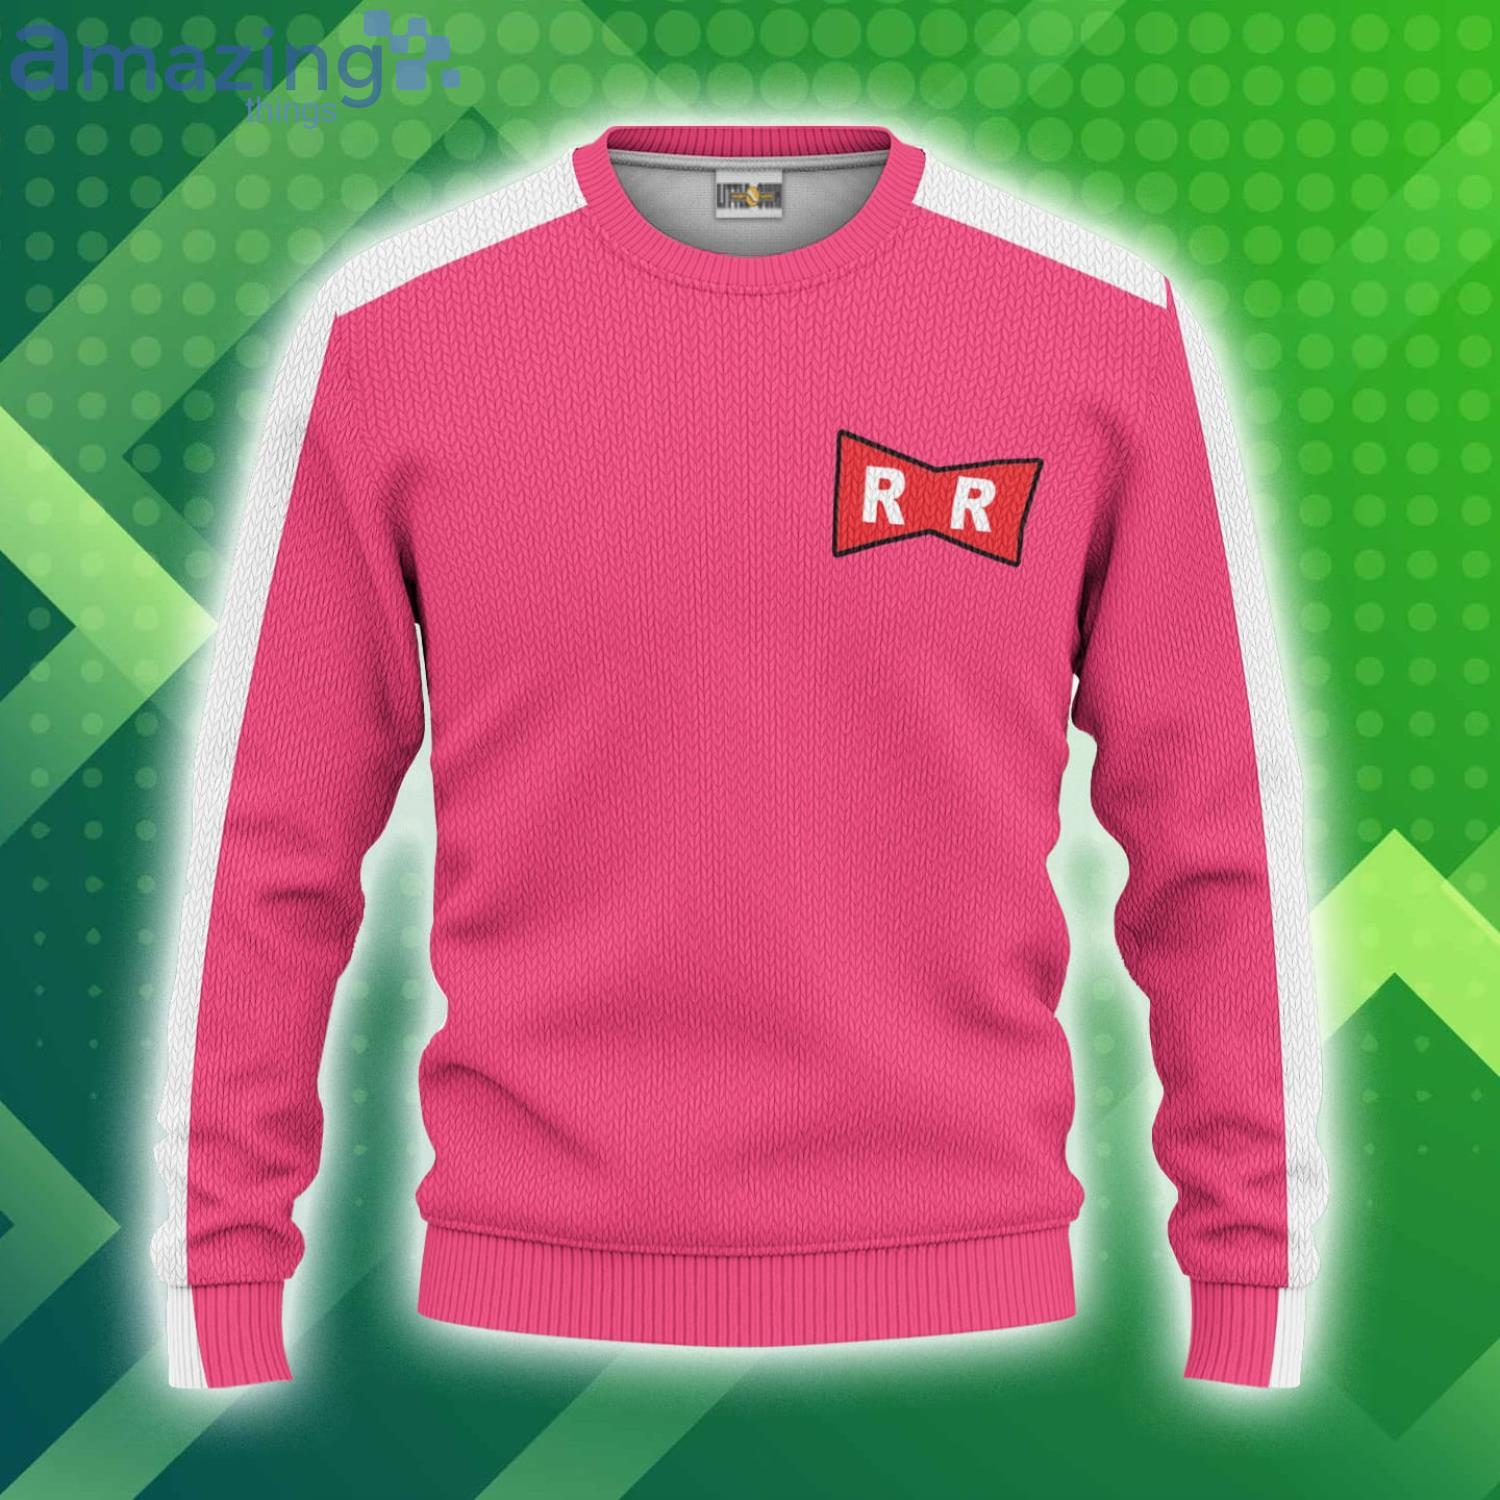 Android 18 Uniform Christmas Ugly Sweater Dragon Ball Anime 3D Sweater Cosplay Product Photo 1 Product photo 1